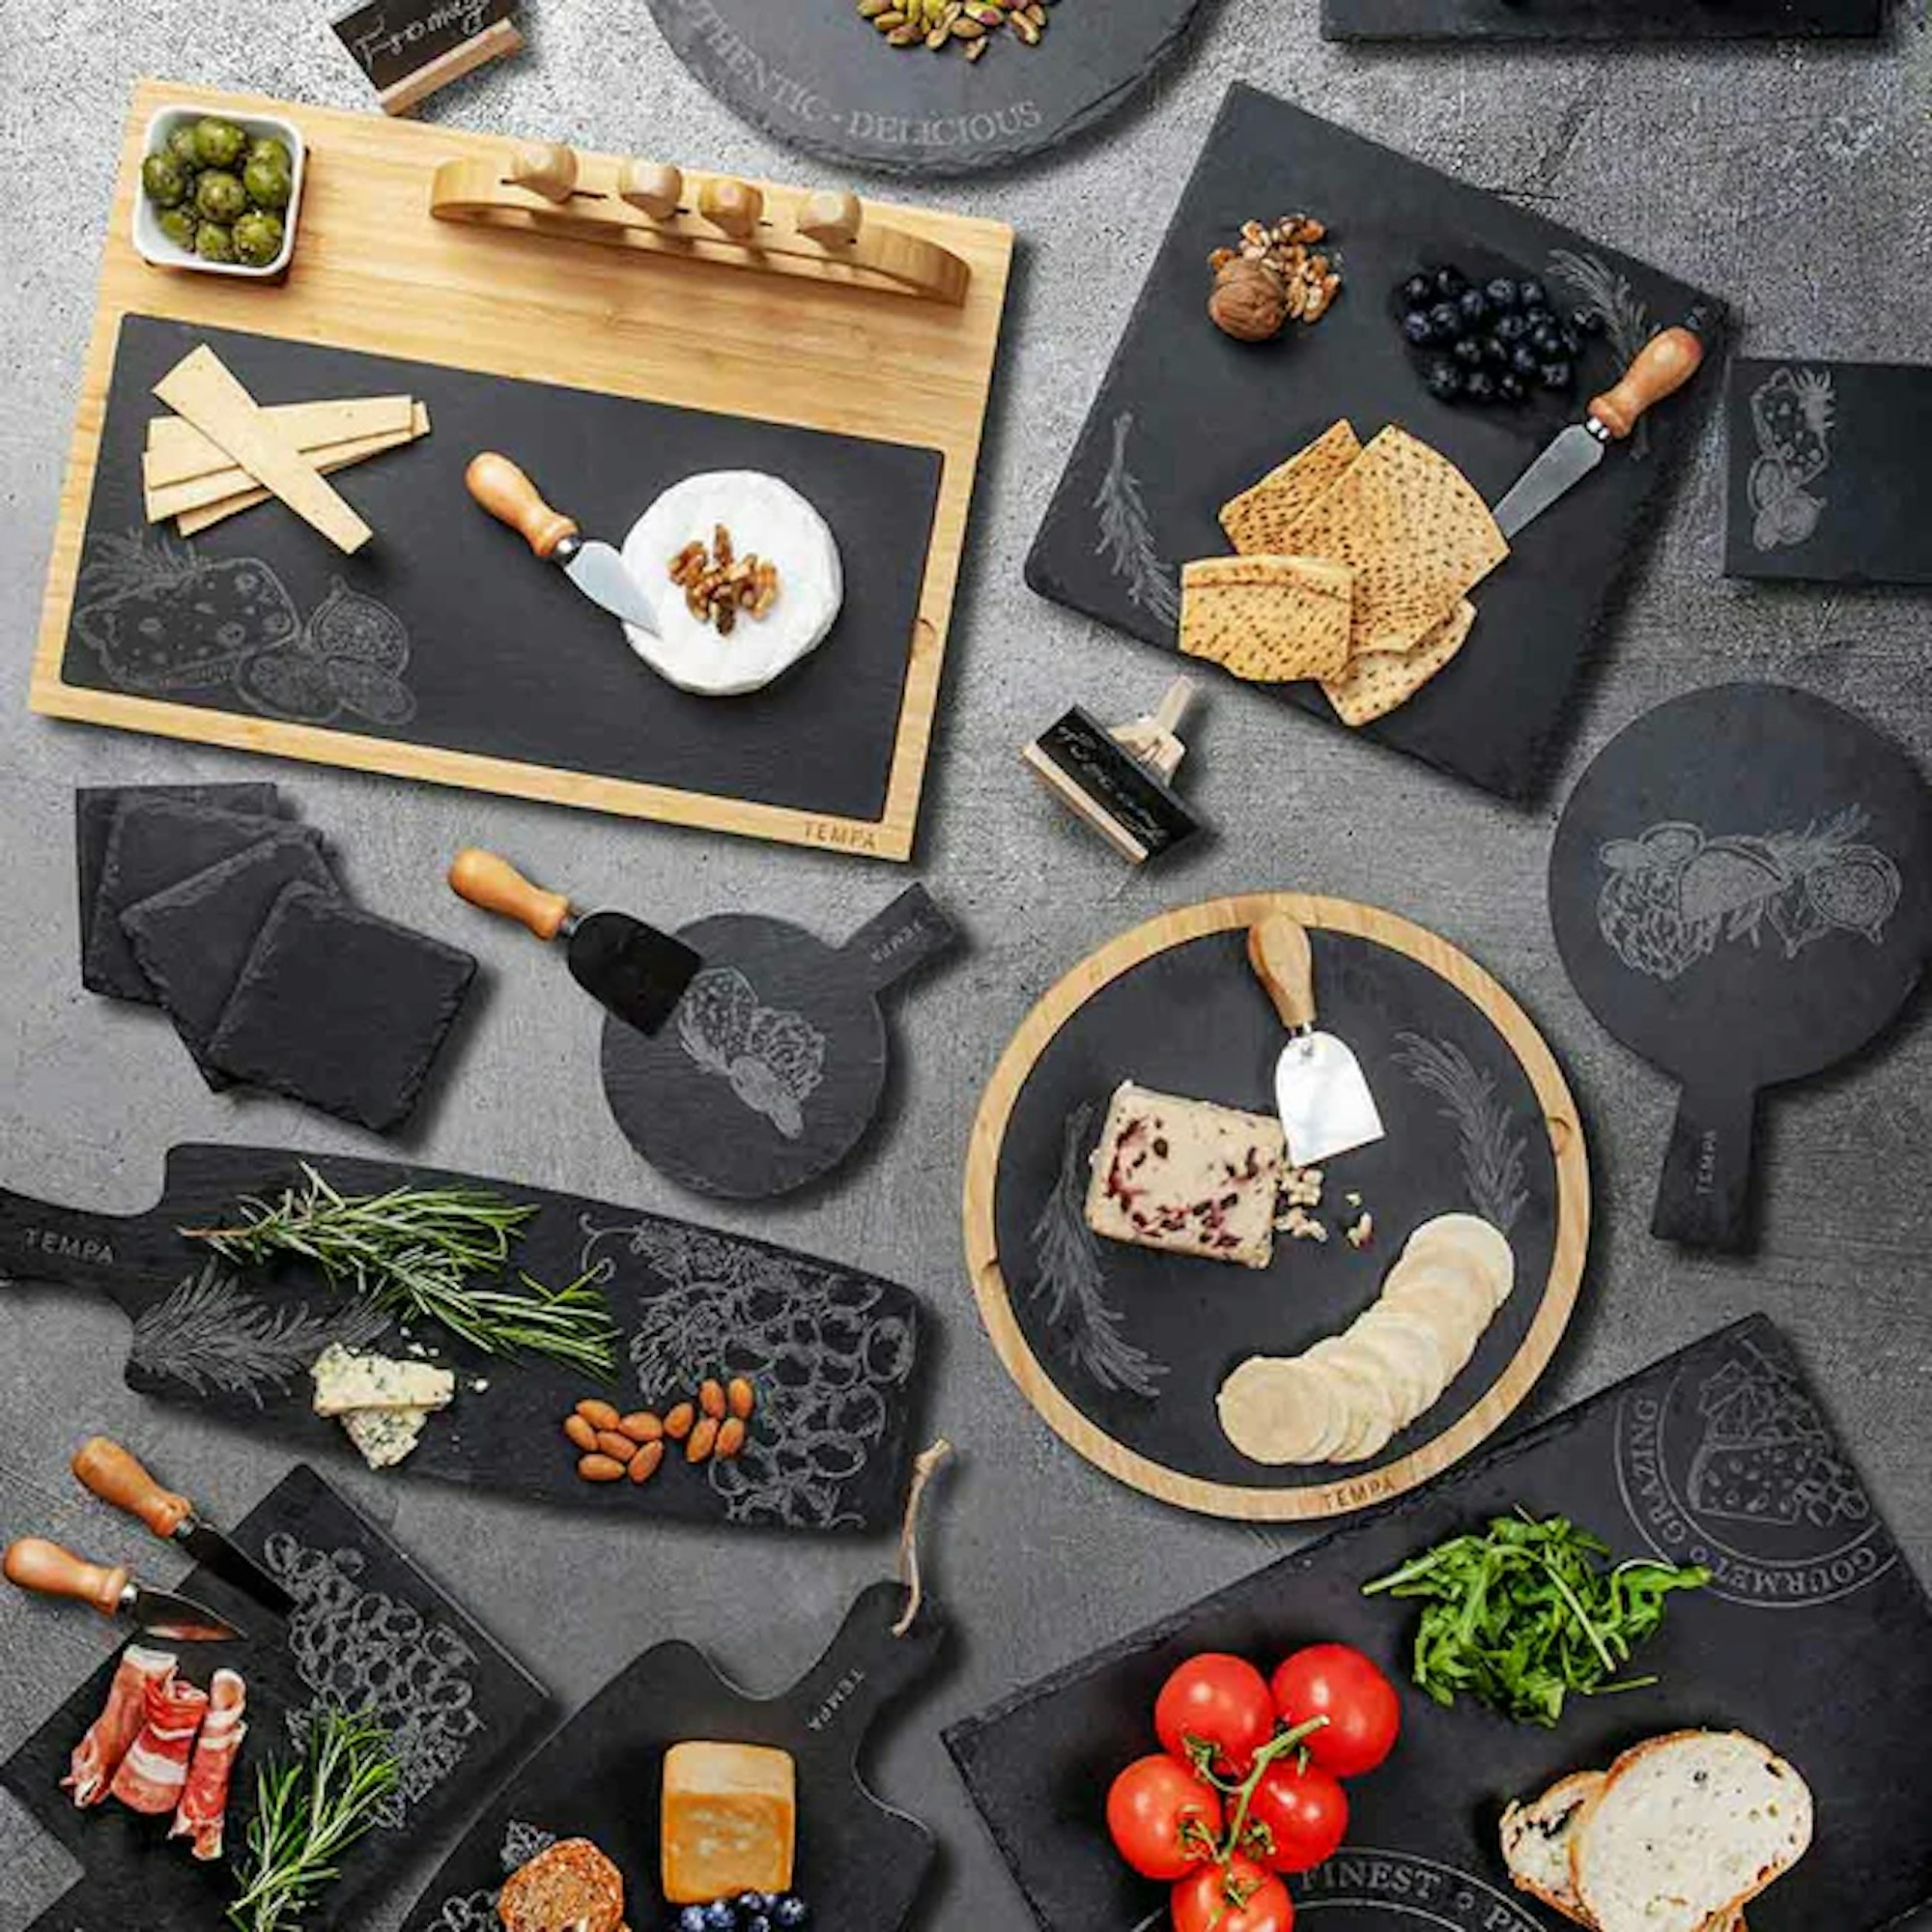 A set of different serving board with cheese, cured meats, vegetables and specialty serving utensils